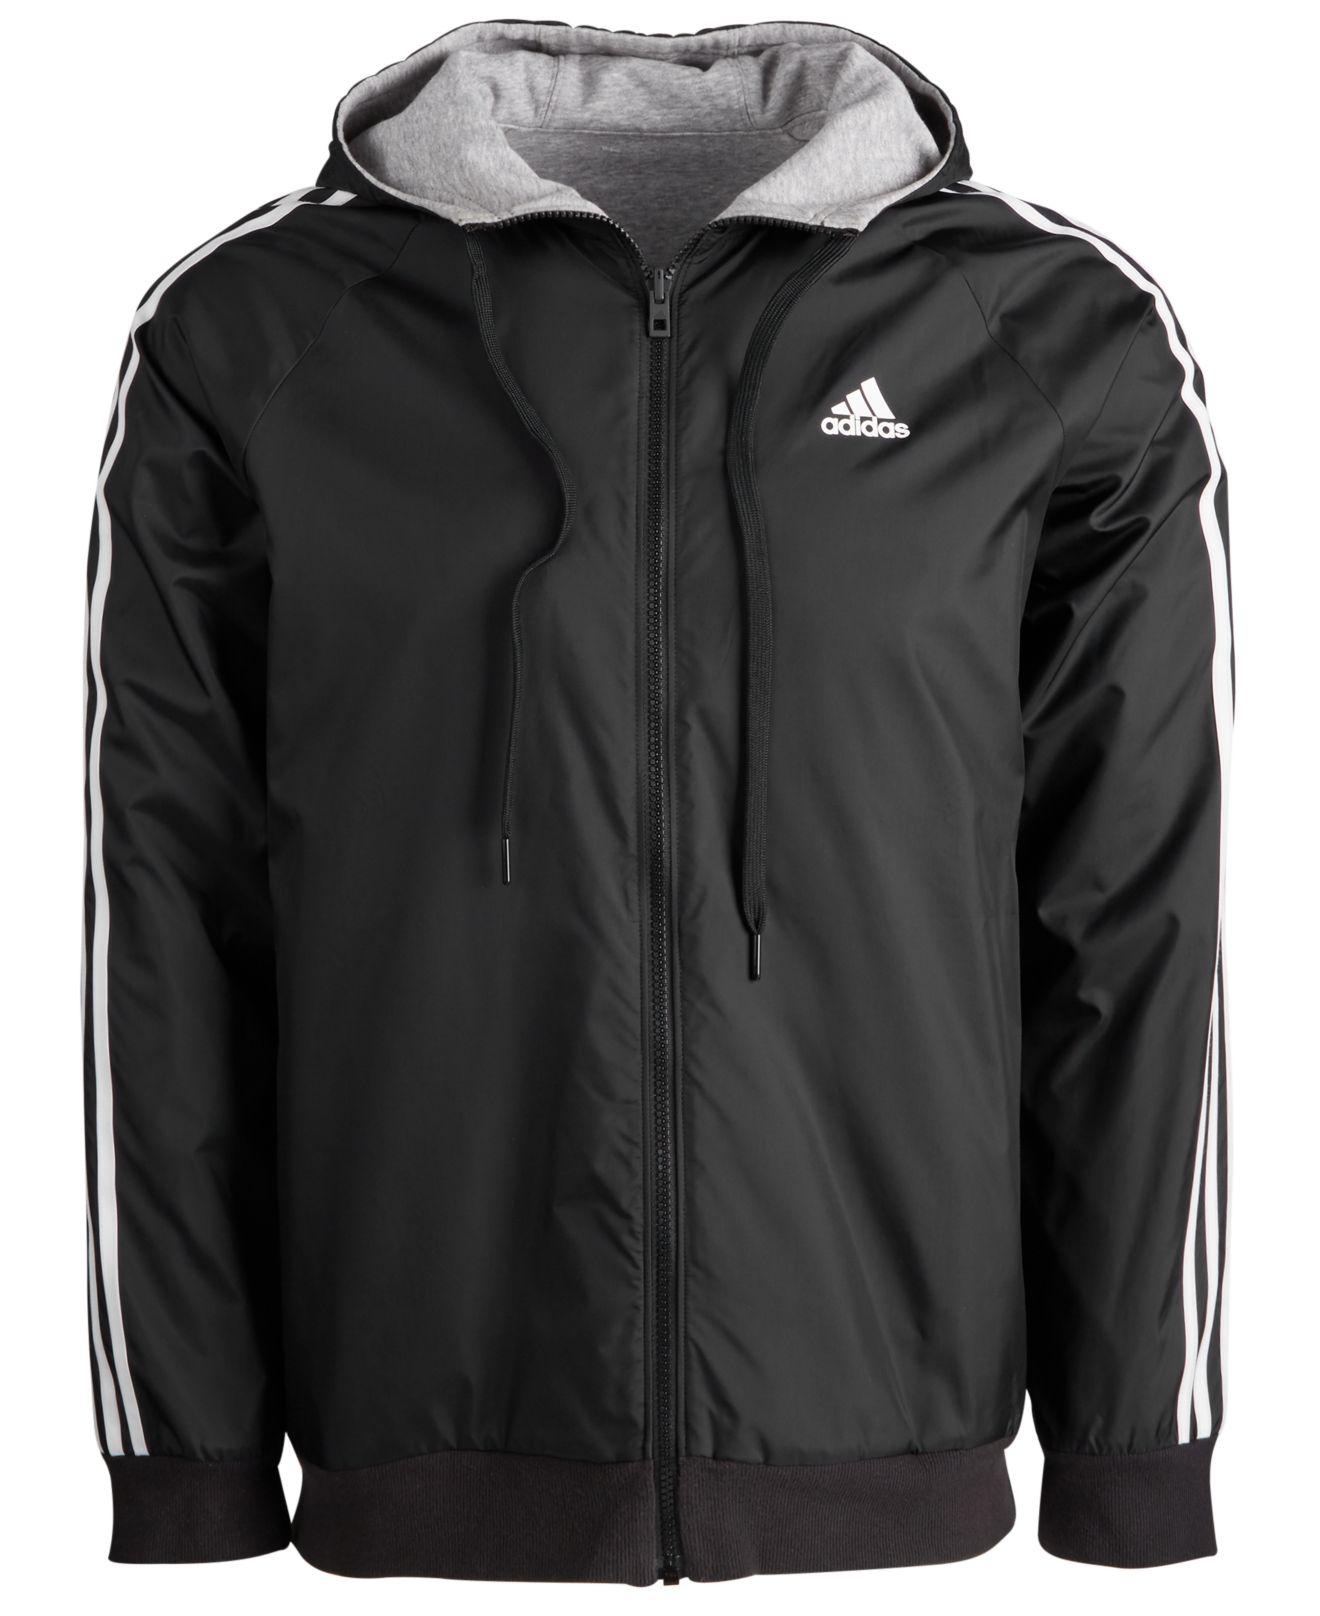 Adidas Reversible Hooded Jacket Sale Online, SAVE 55% - online-pmo.com